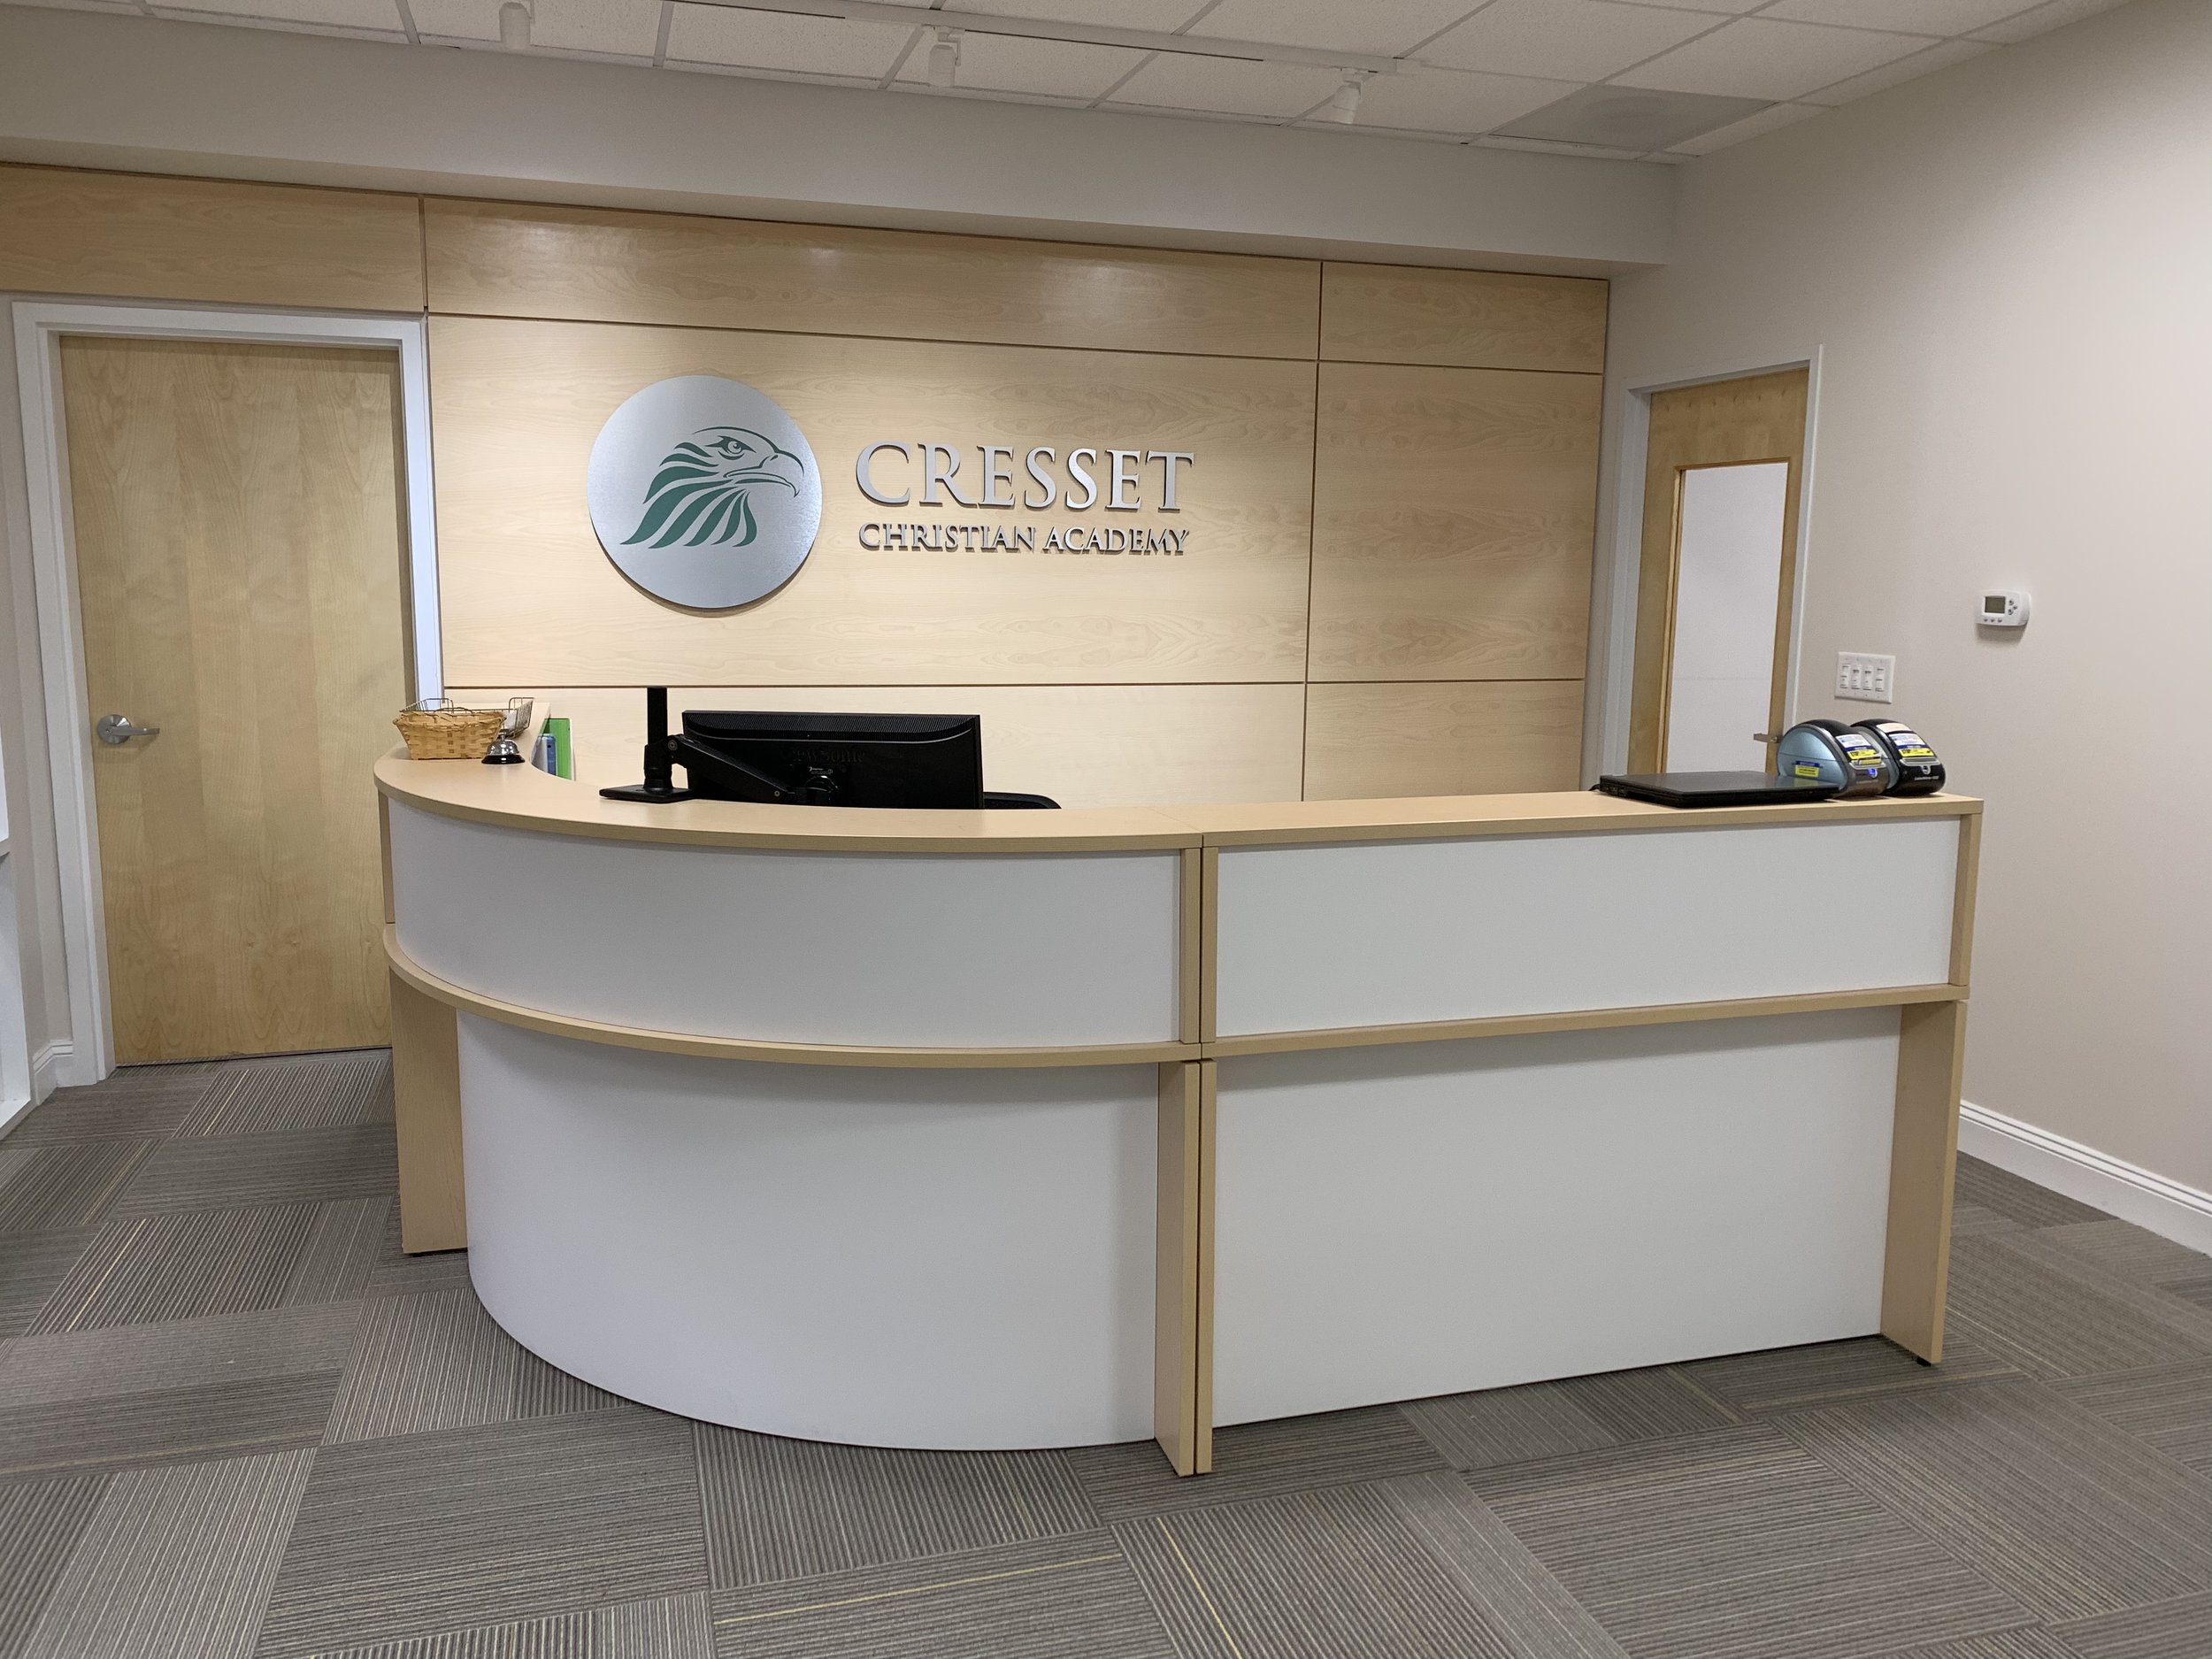 Cresset Christian Academy Dynamic Office Services